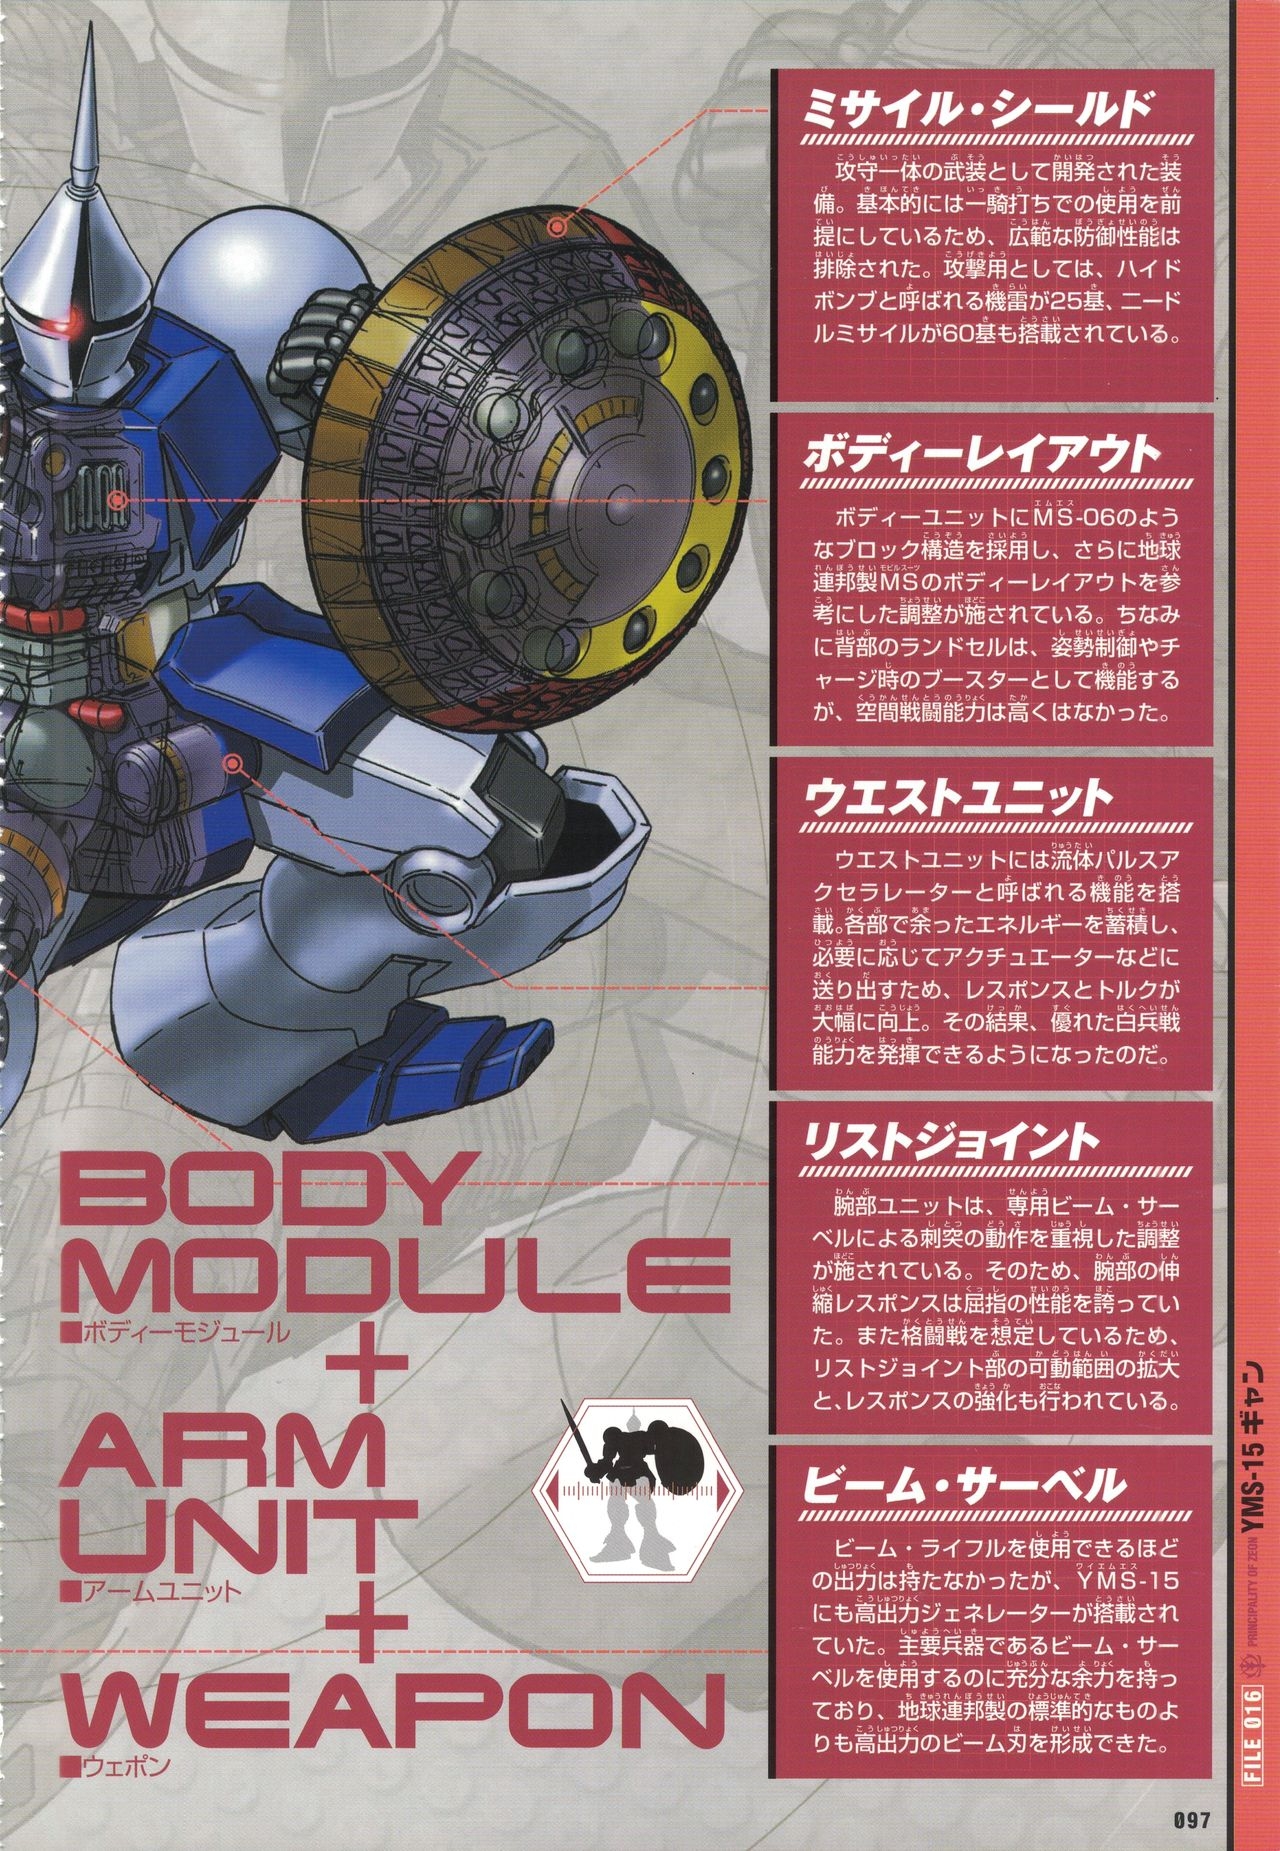 Mobile Suit Gundam - New Cross-Section Book - One Year War Edition 101